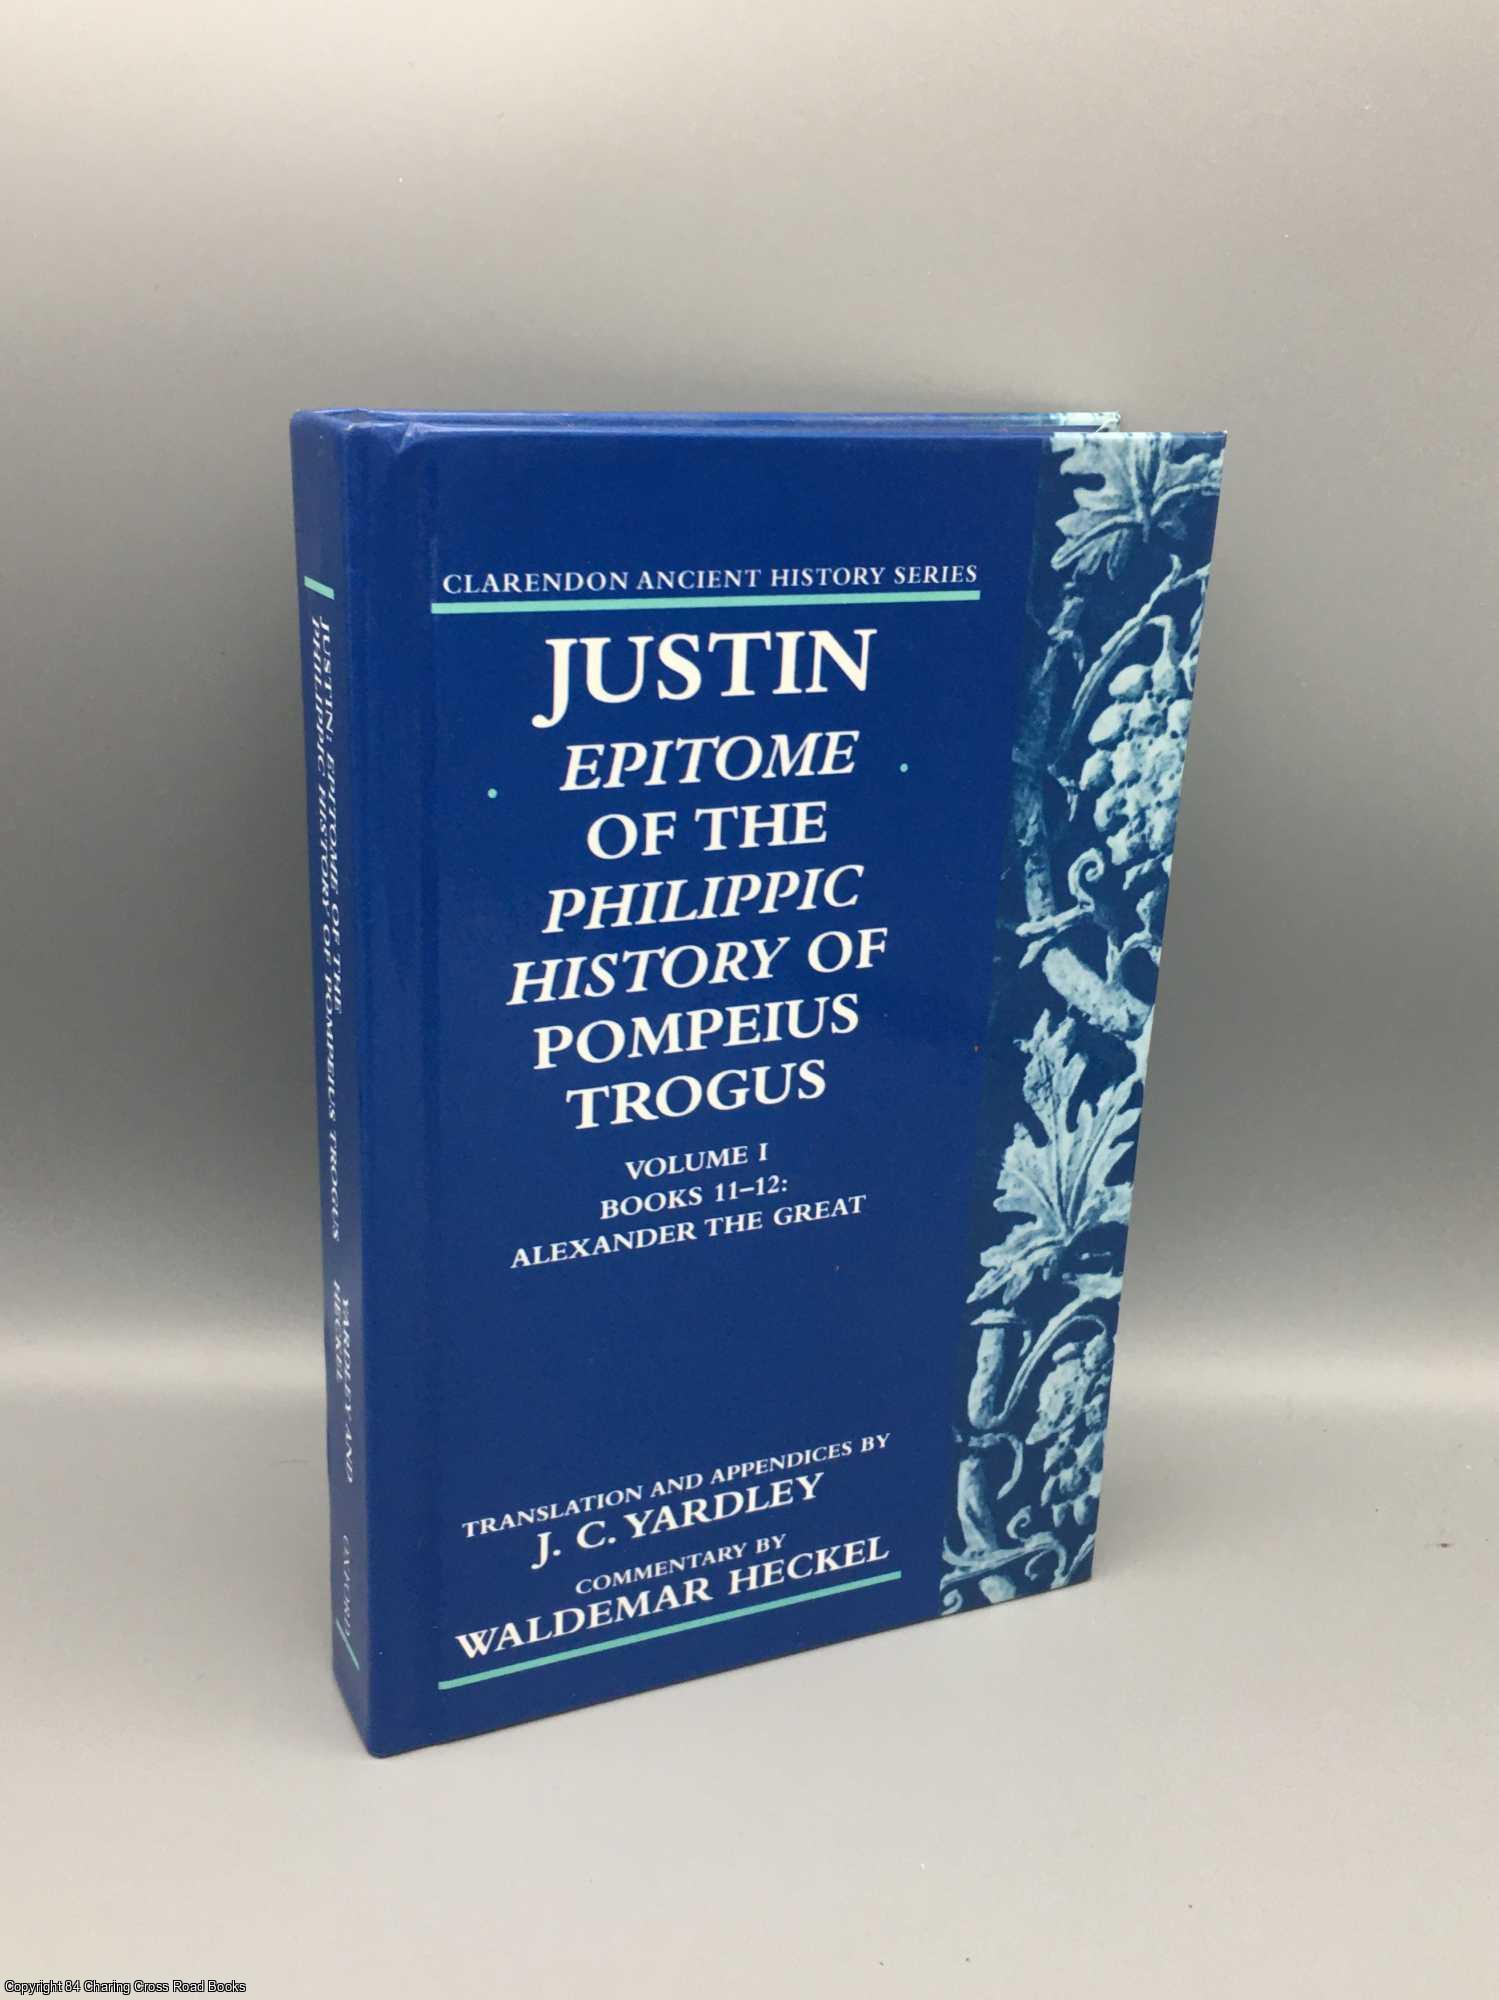 Heckel; Yardley - Justin: Epitome of the Philippic History of Pompeius Trogus I Books 11-12 Alexander the Great